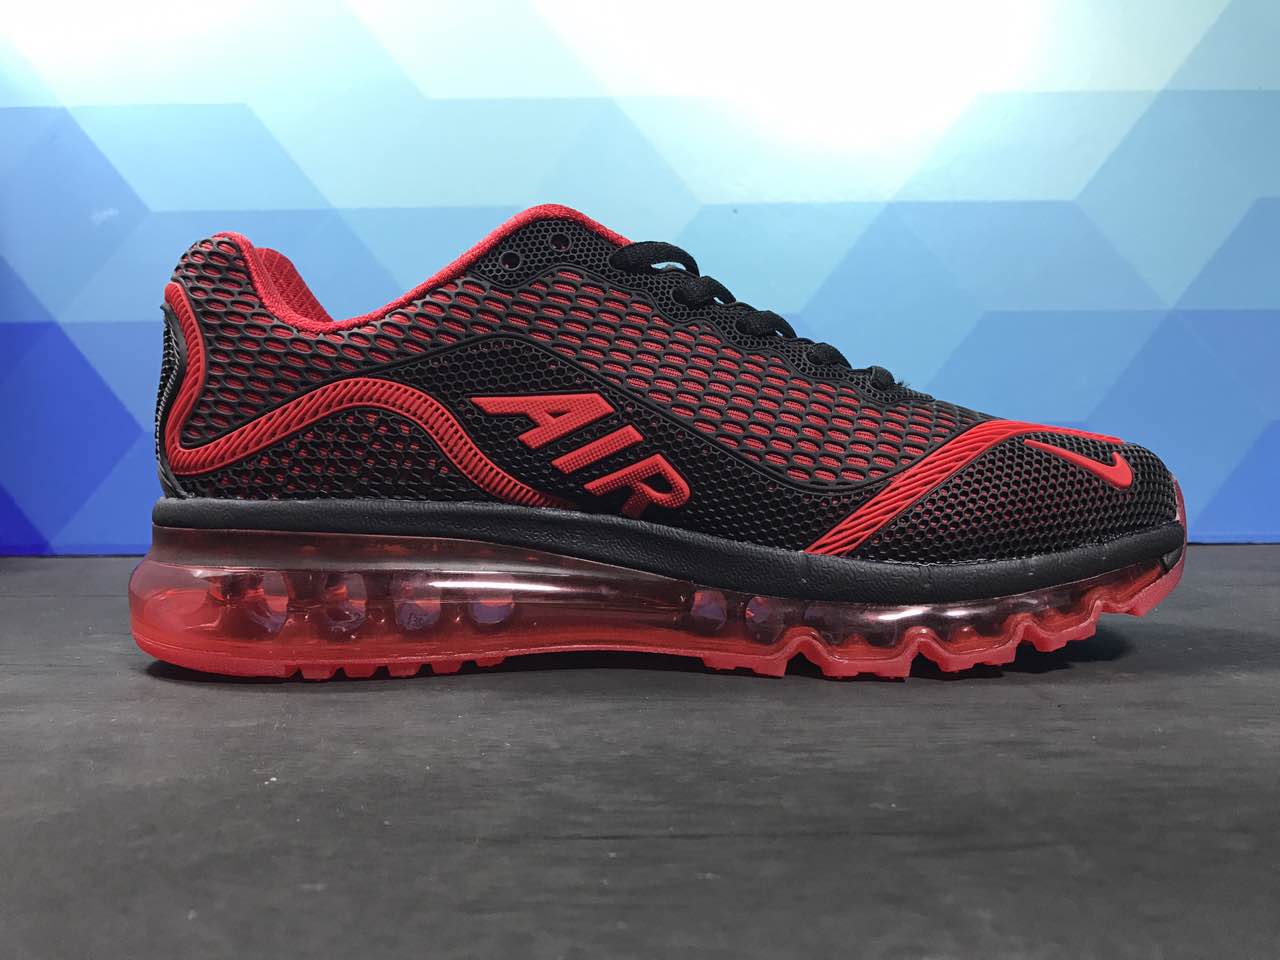 Nike Air Max 2017 III Black Red Shoes - Click Image to Close